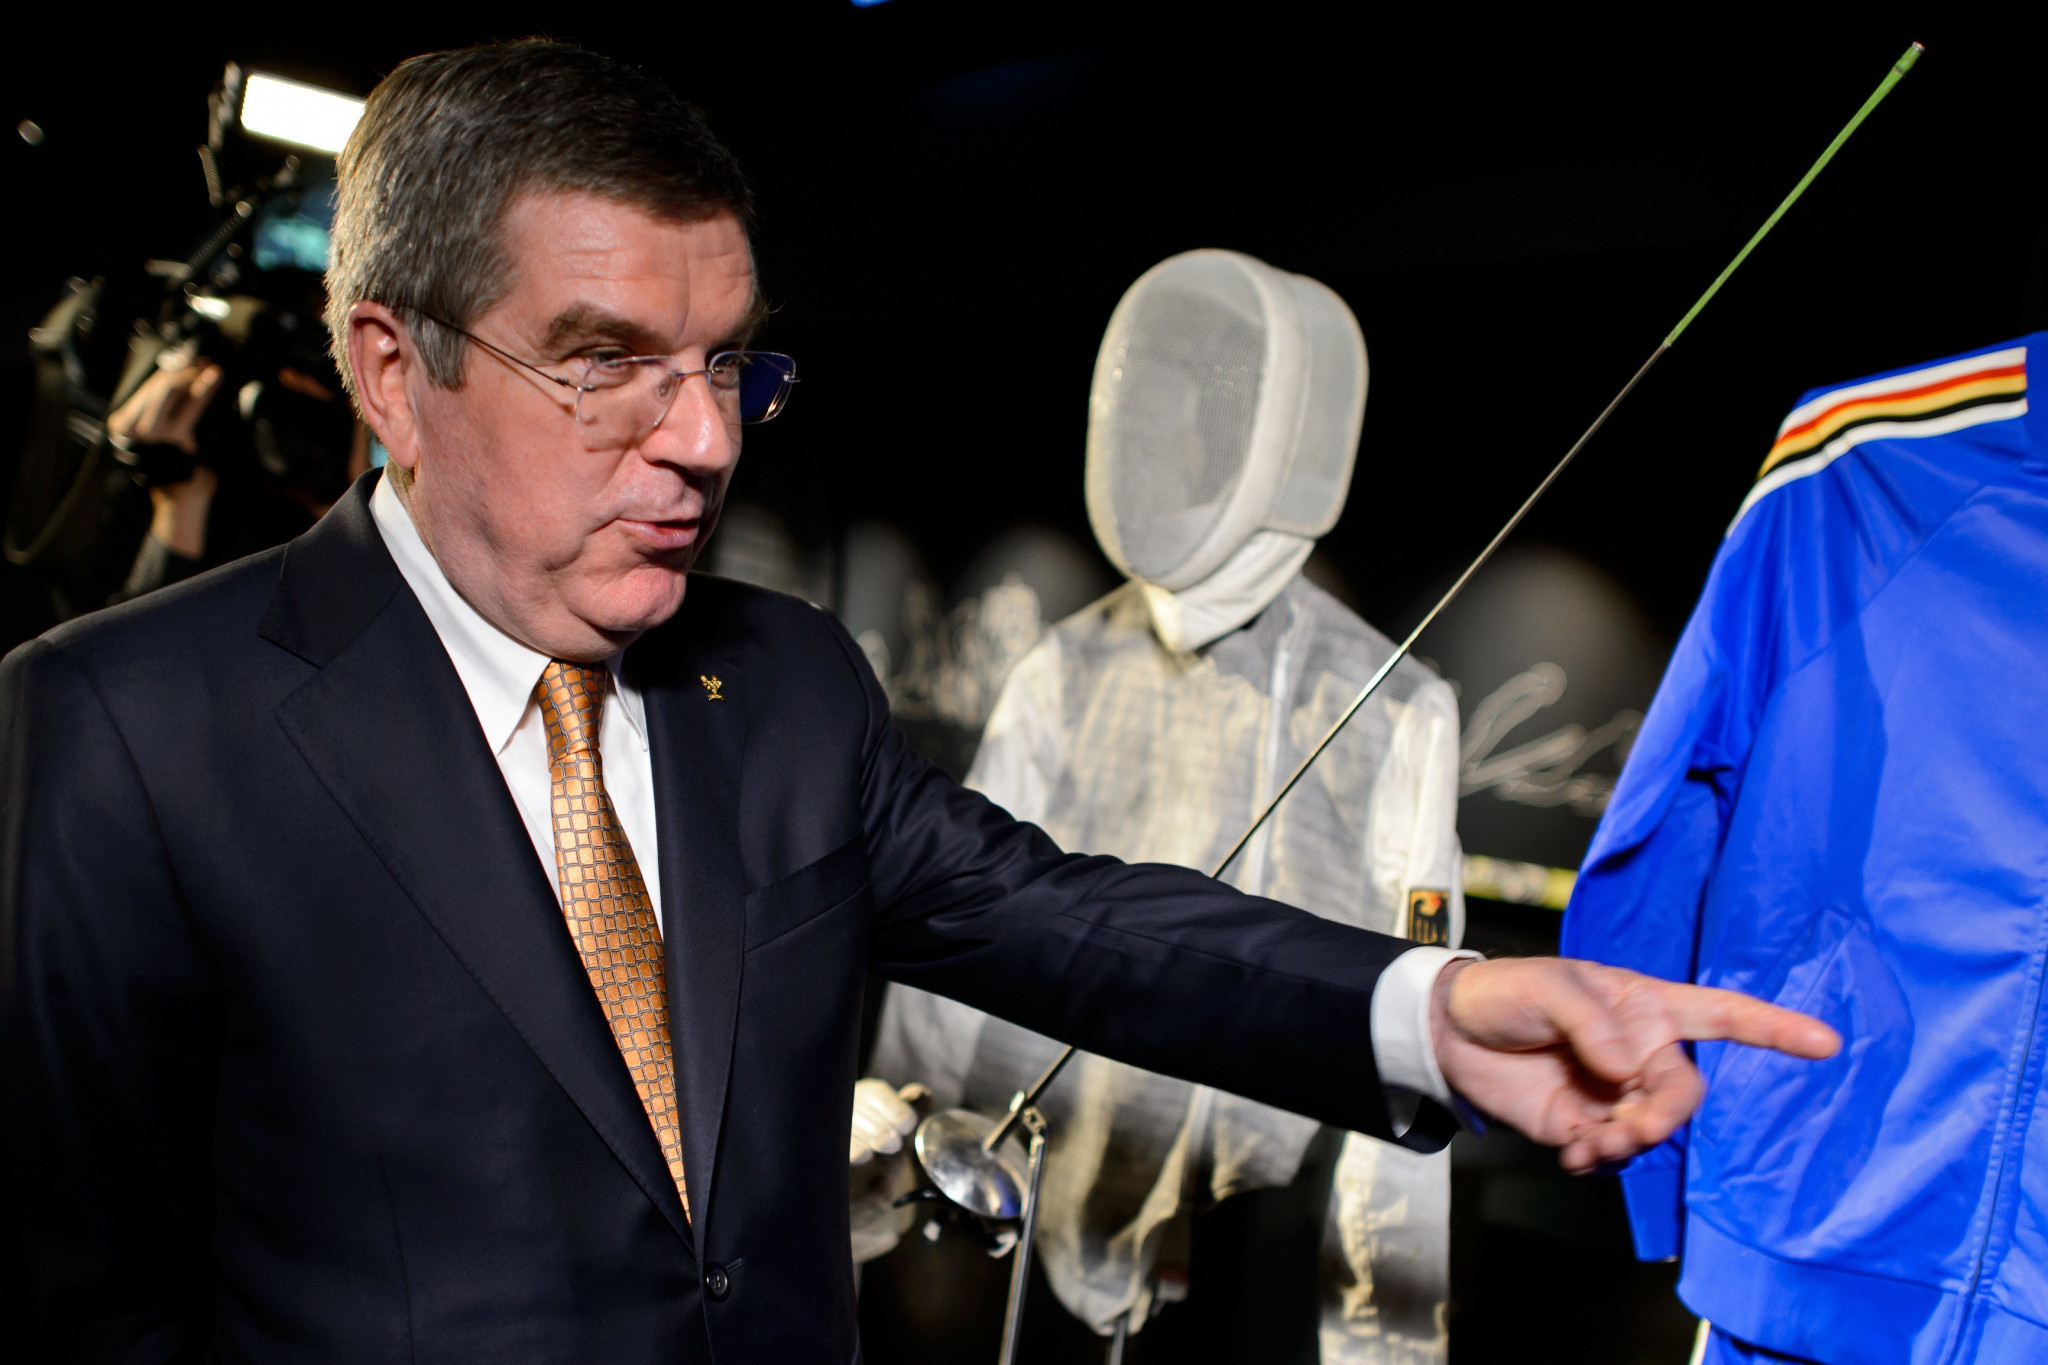 Former fencer and IOC President Thomas Bach grew up in Tauberbischofsheim, where the FIE World Cup has been cancelled ©Getty Images